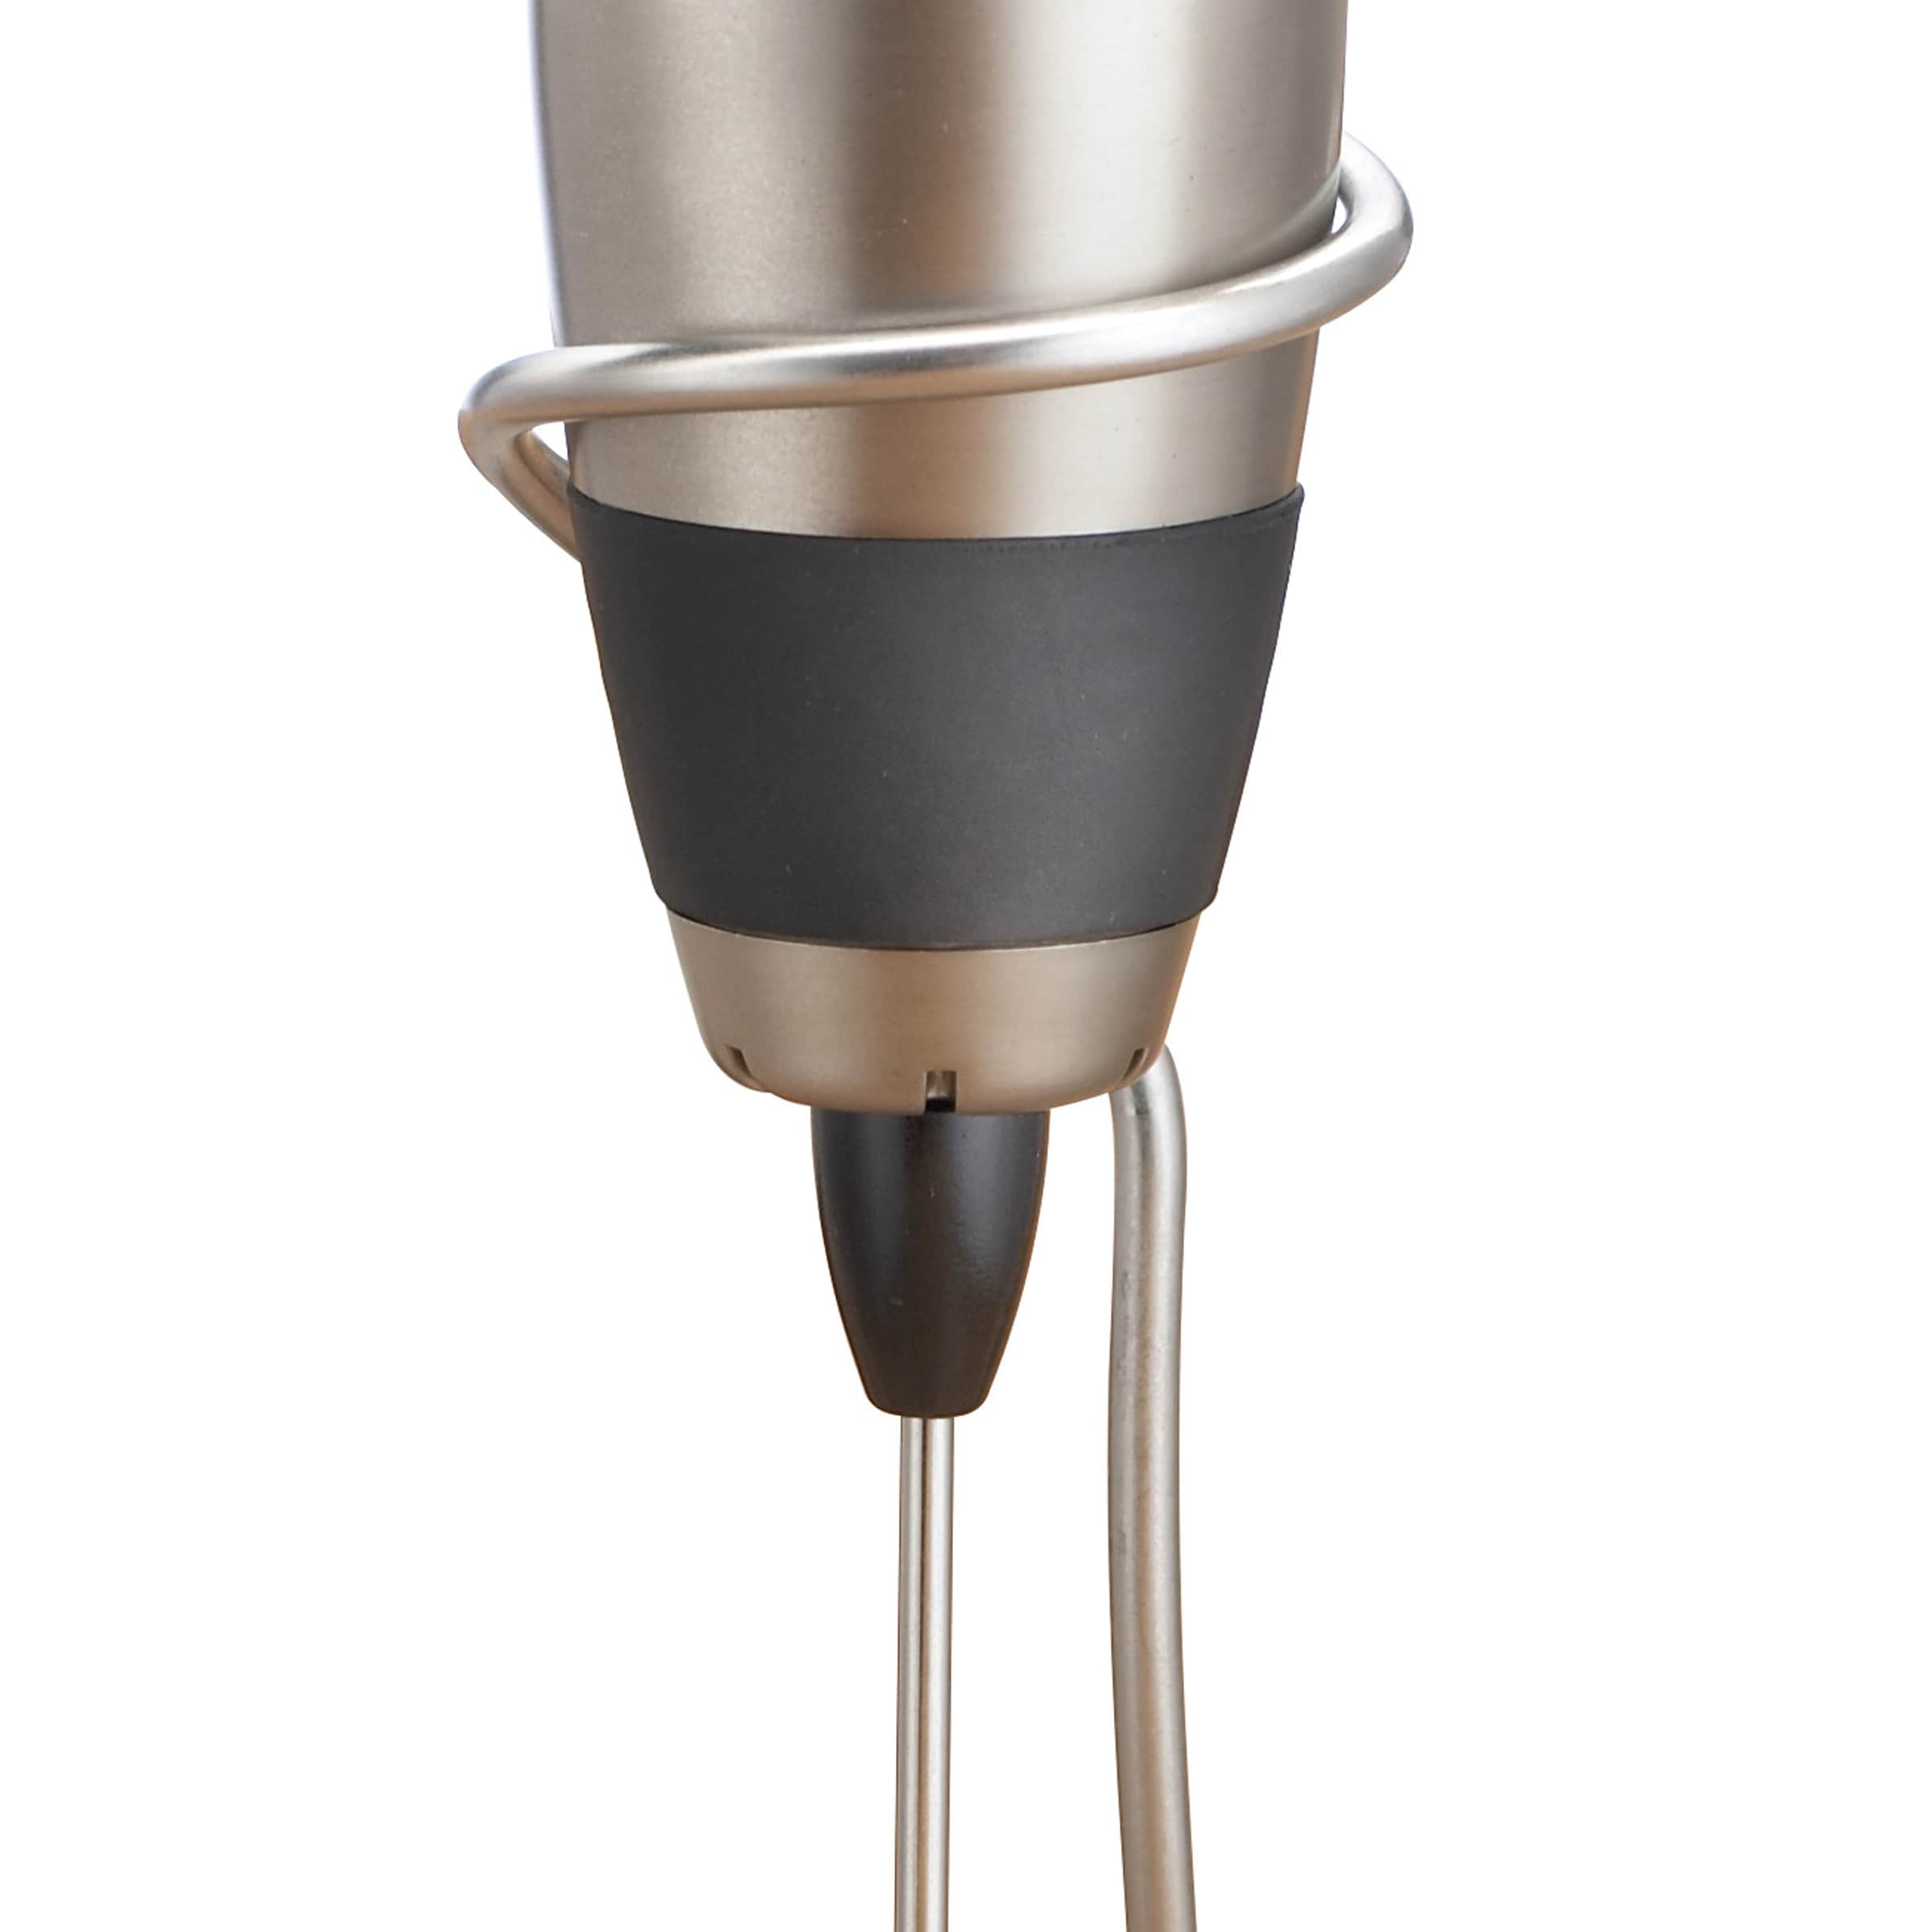 https://ak1.ostkcdn.com/images/products/7469243/BonJour-Stainless-Steel-Milk-Frother-dd00cea1-e363-4741-83f5-47bd4146ca5e.jpg